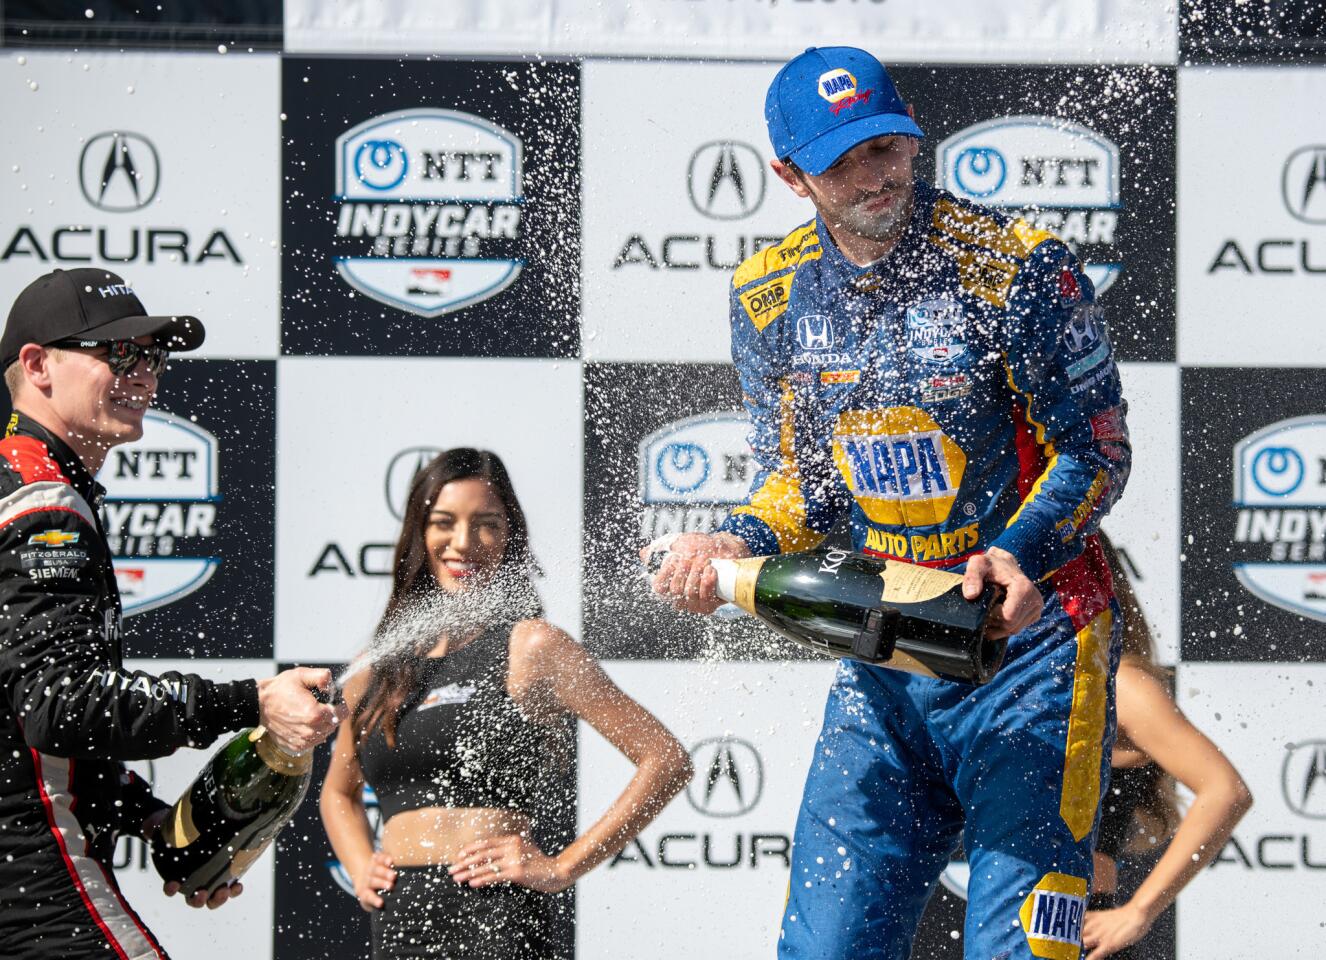 Long Beach Grand Prix winner Alexander Rossi, right, is sprayed with champagne by runner-up Josef Newgarden.